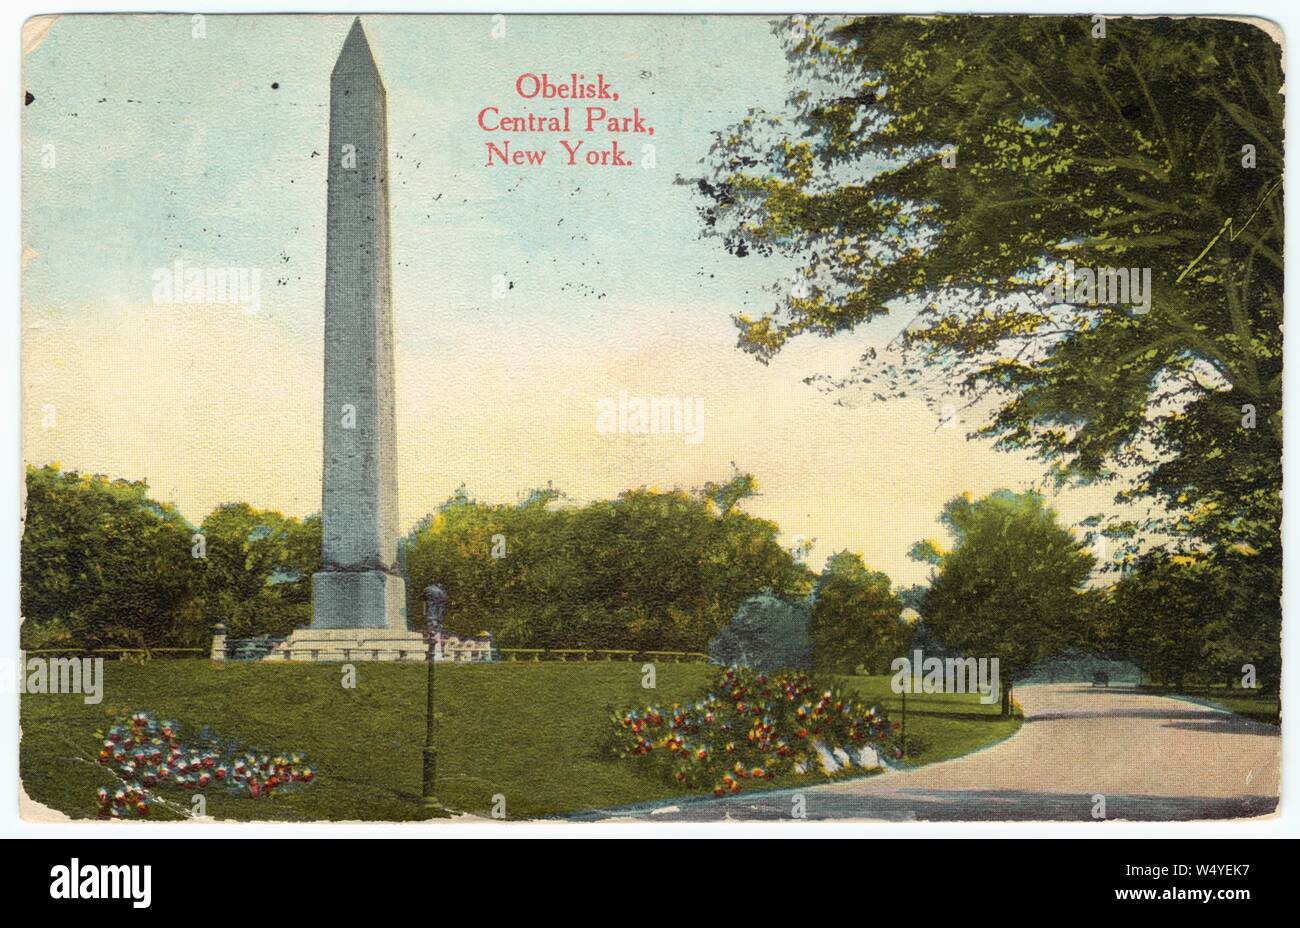 Engraved postcard of the Cleopatra's Needle Obelisk in Central Park, New York City, New York, published by Success Postal Card Co, 1913. From the New York Public Library. () Stock Photo